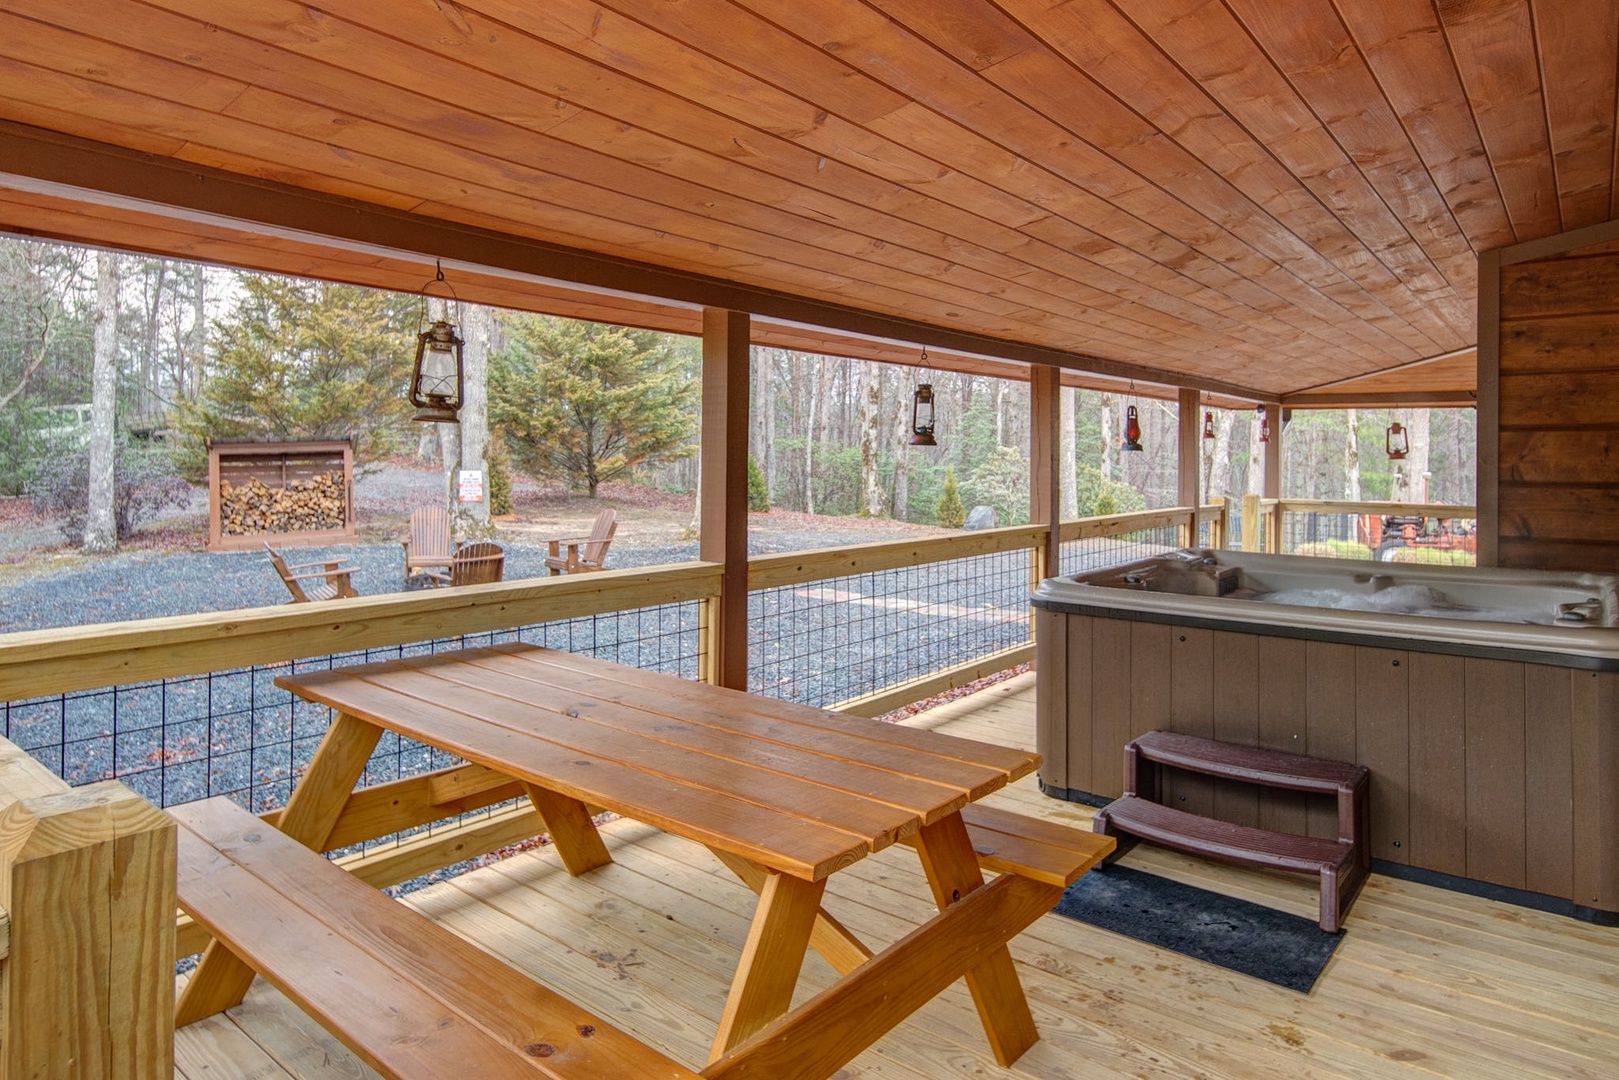 Hot Tub and picnic table on the covered wrap around porch